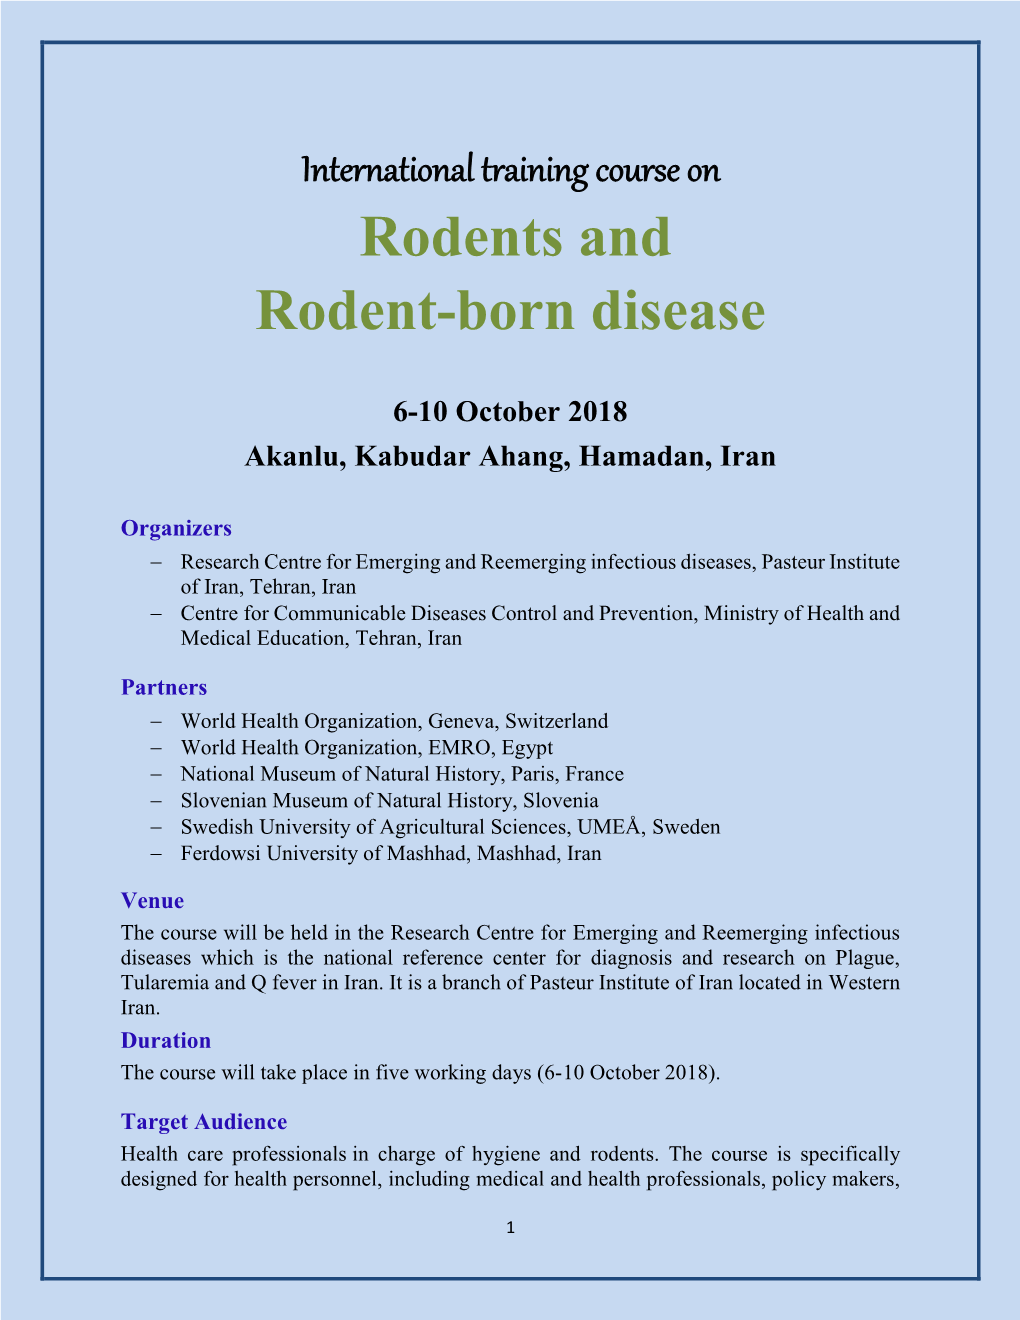 Rodents and Rodent-Born Disease